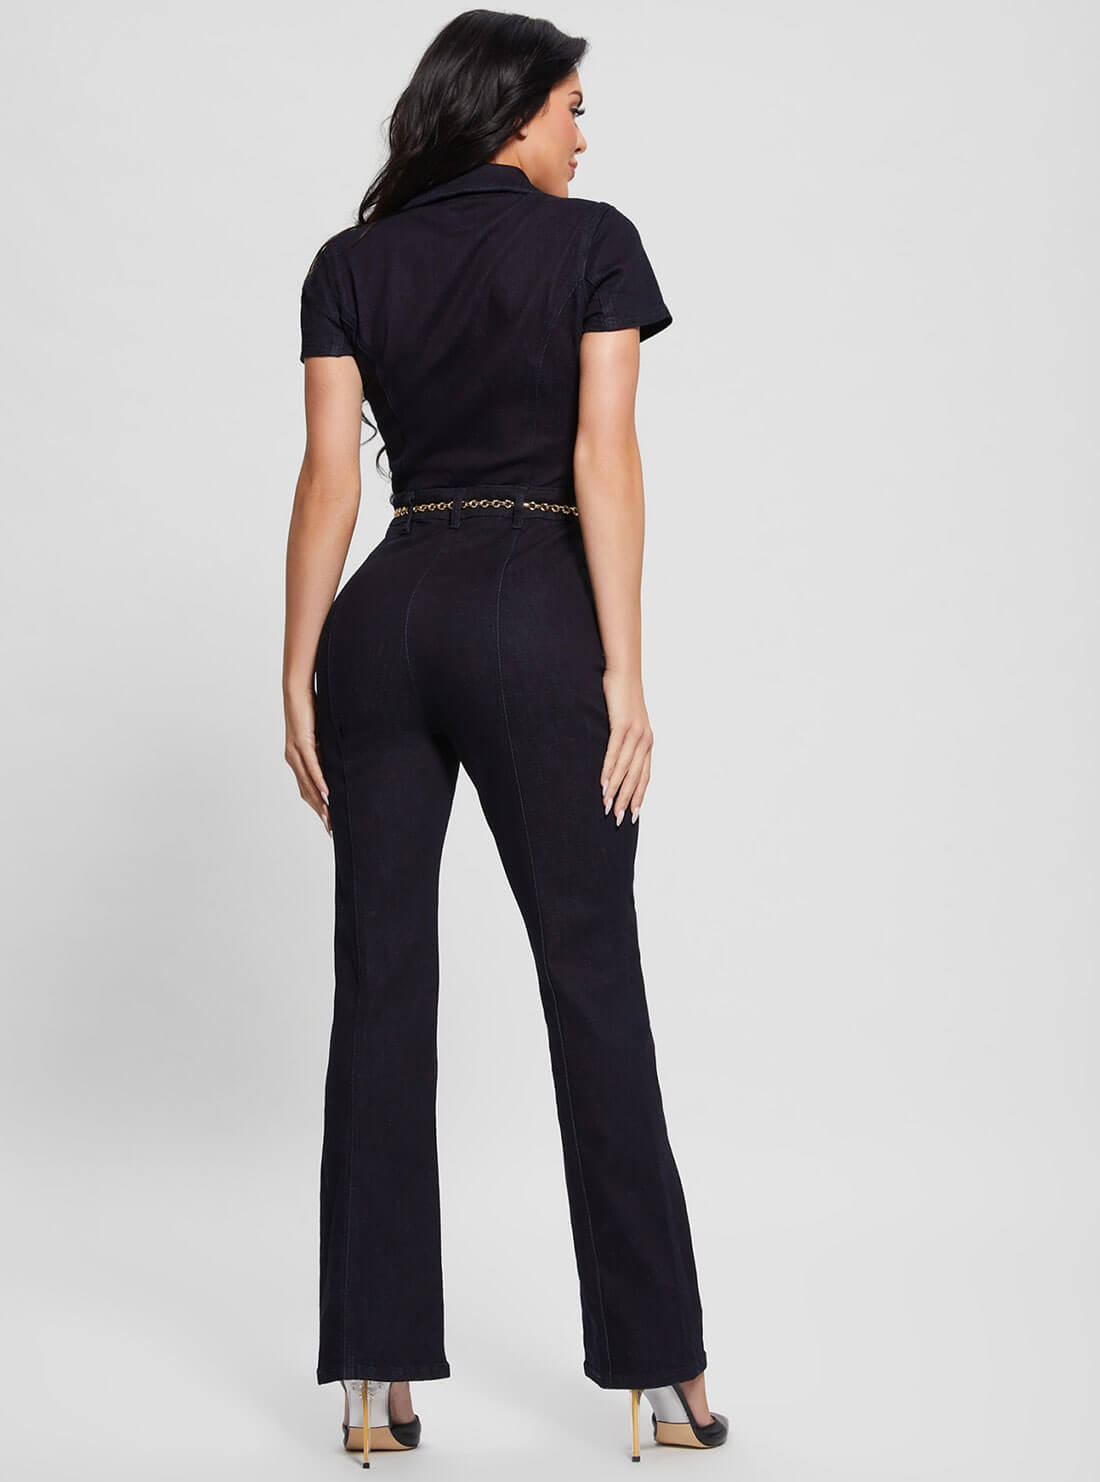 Dark Blue Ember Flare Denim Jumpsuit In Le Clique Wash | GUESS Women's Apparel | back view